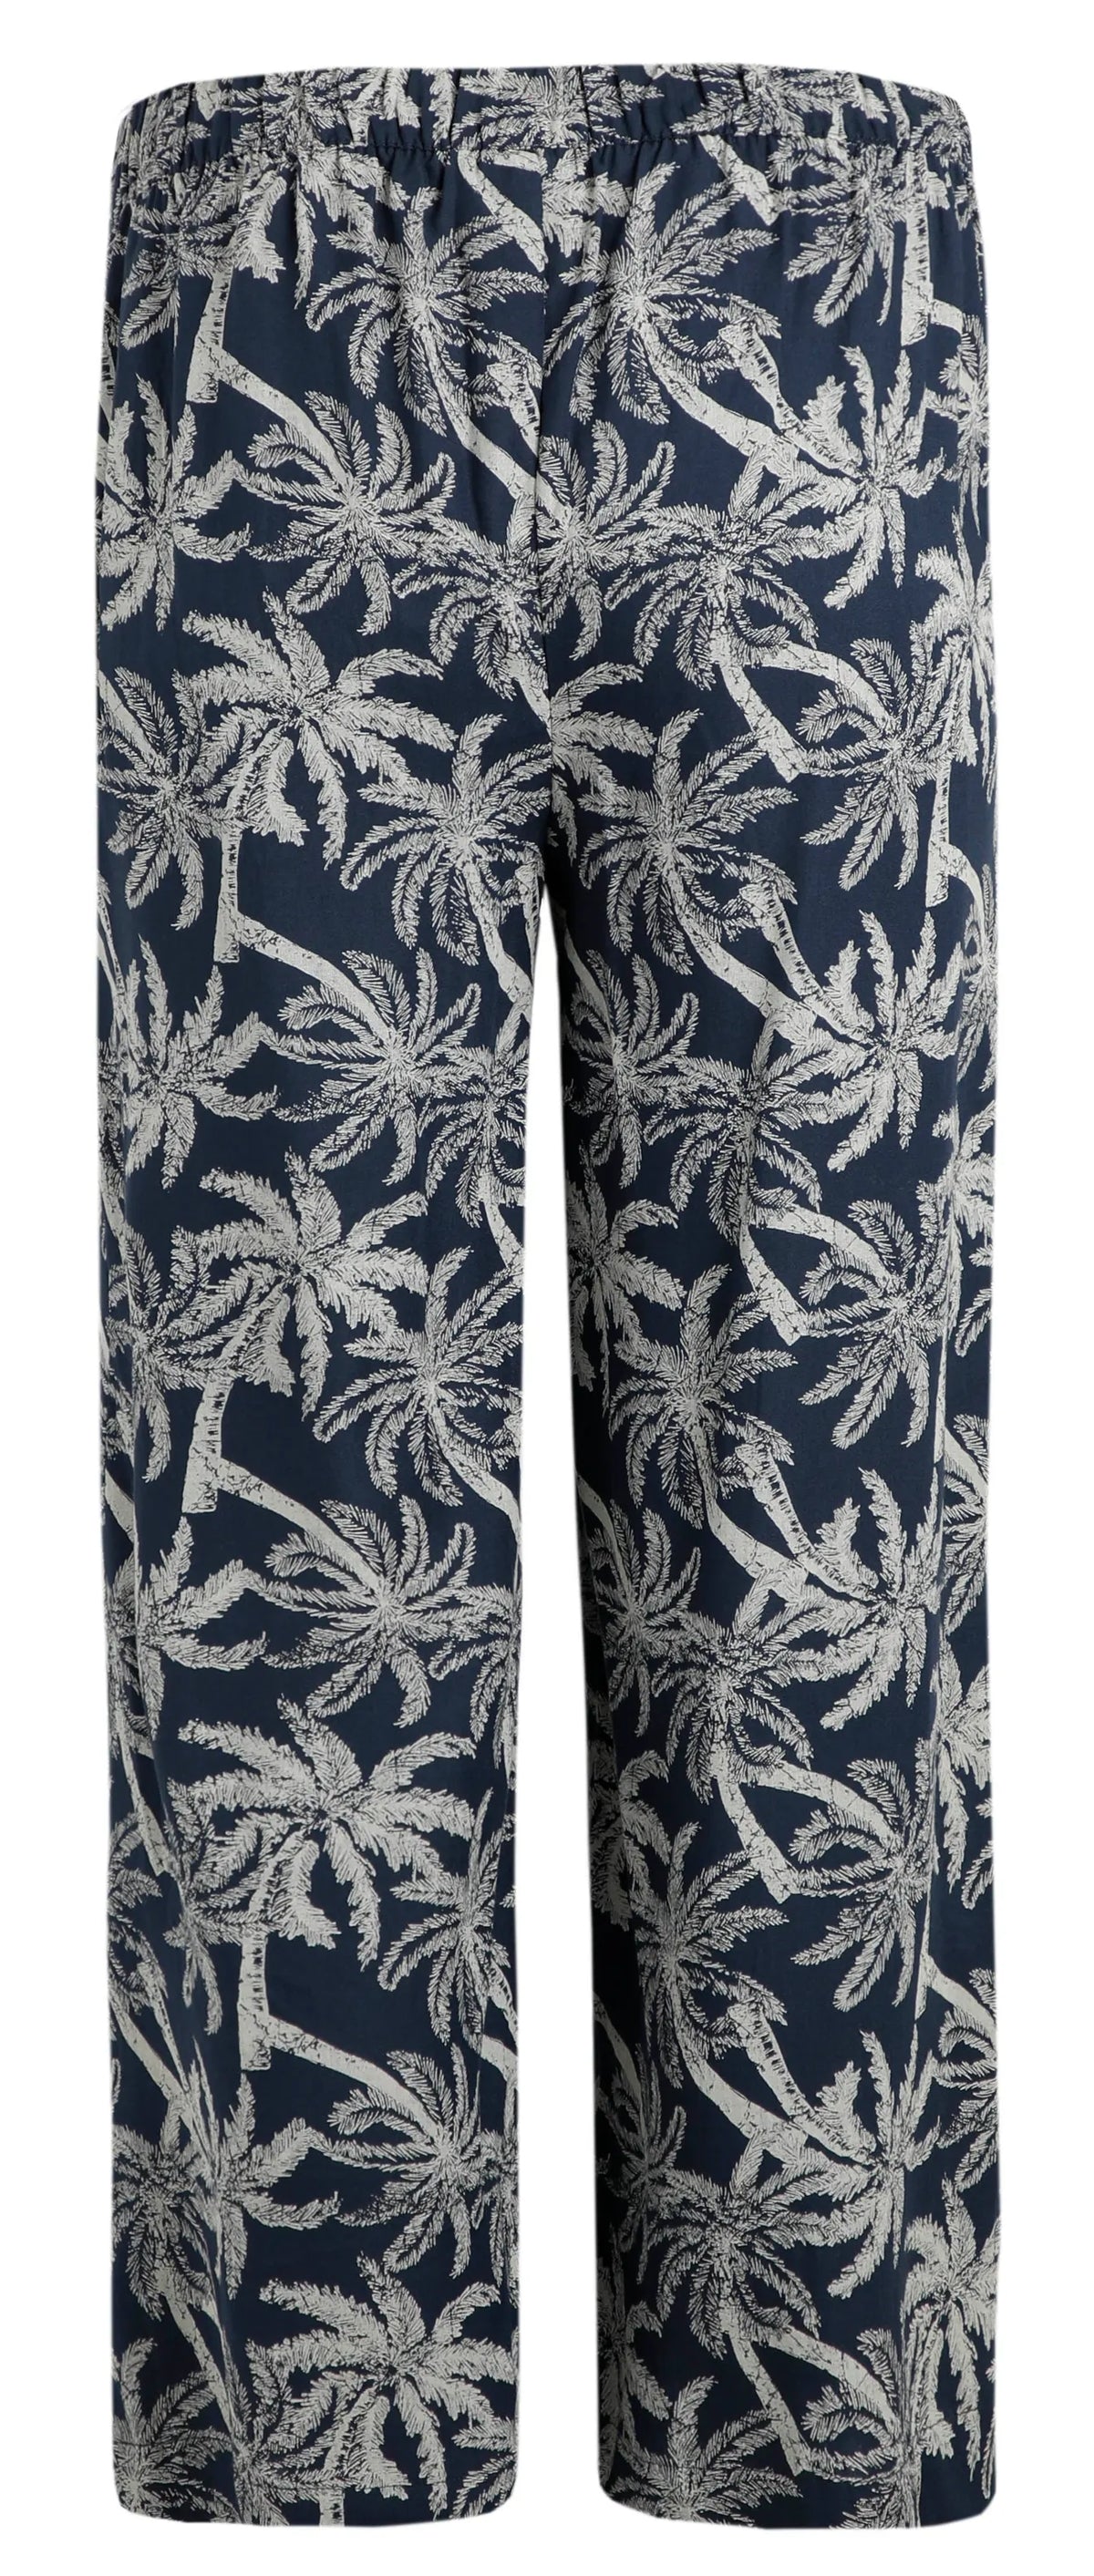 Lightweight palm tree printed crop trousers.